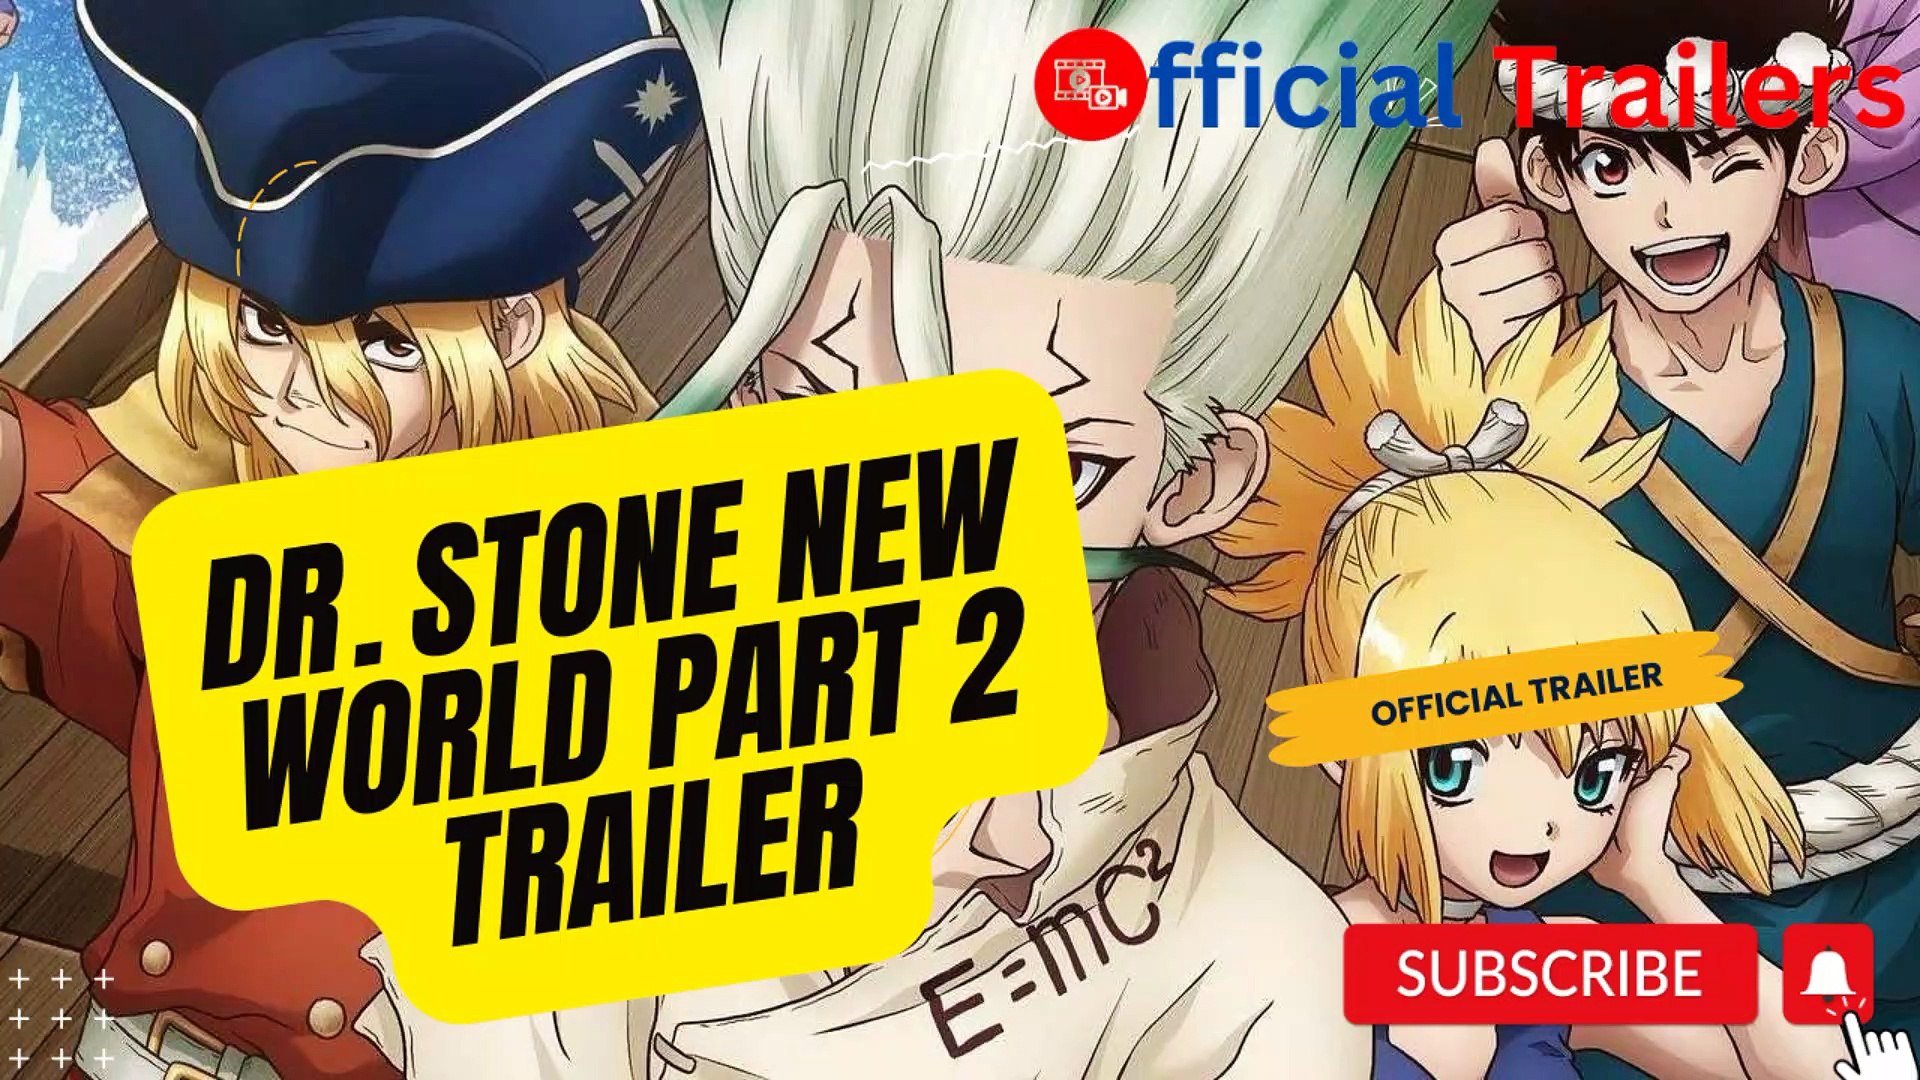 Dr. STONE NEW WORLD PART 2 TRAILER - video Dailymotion